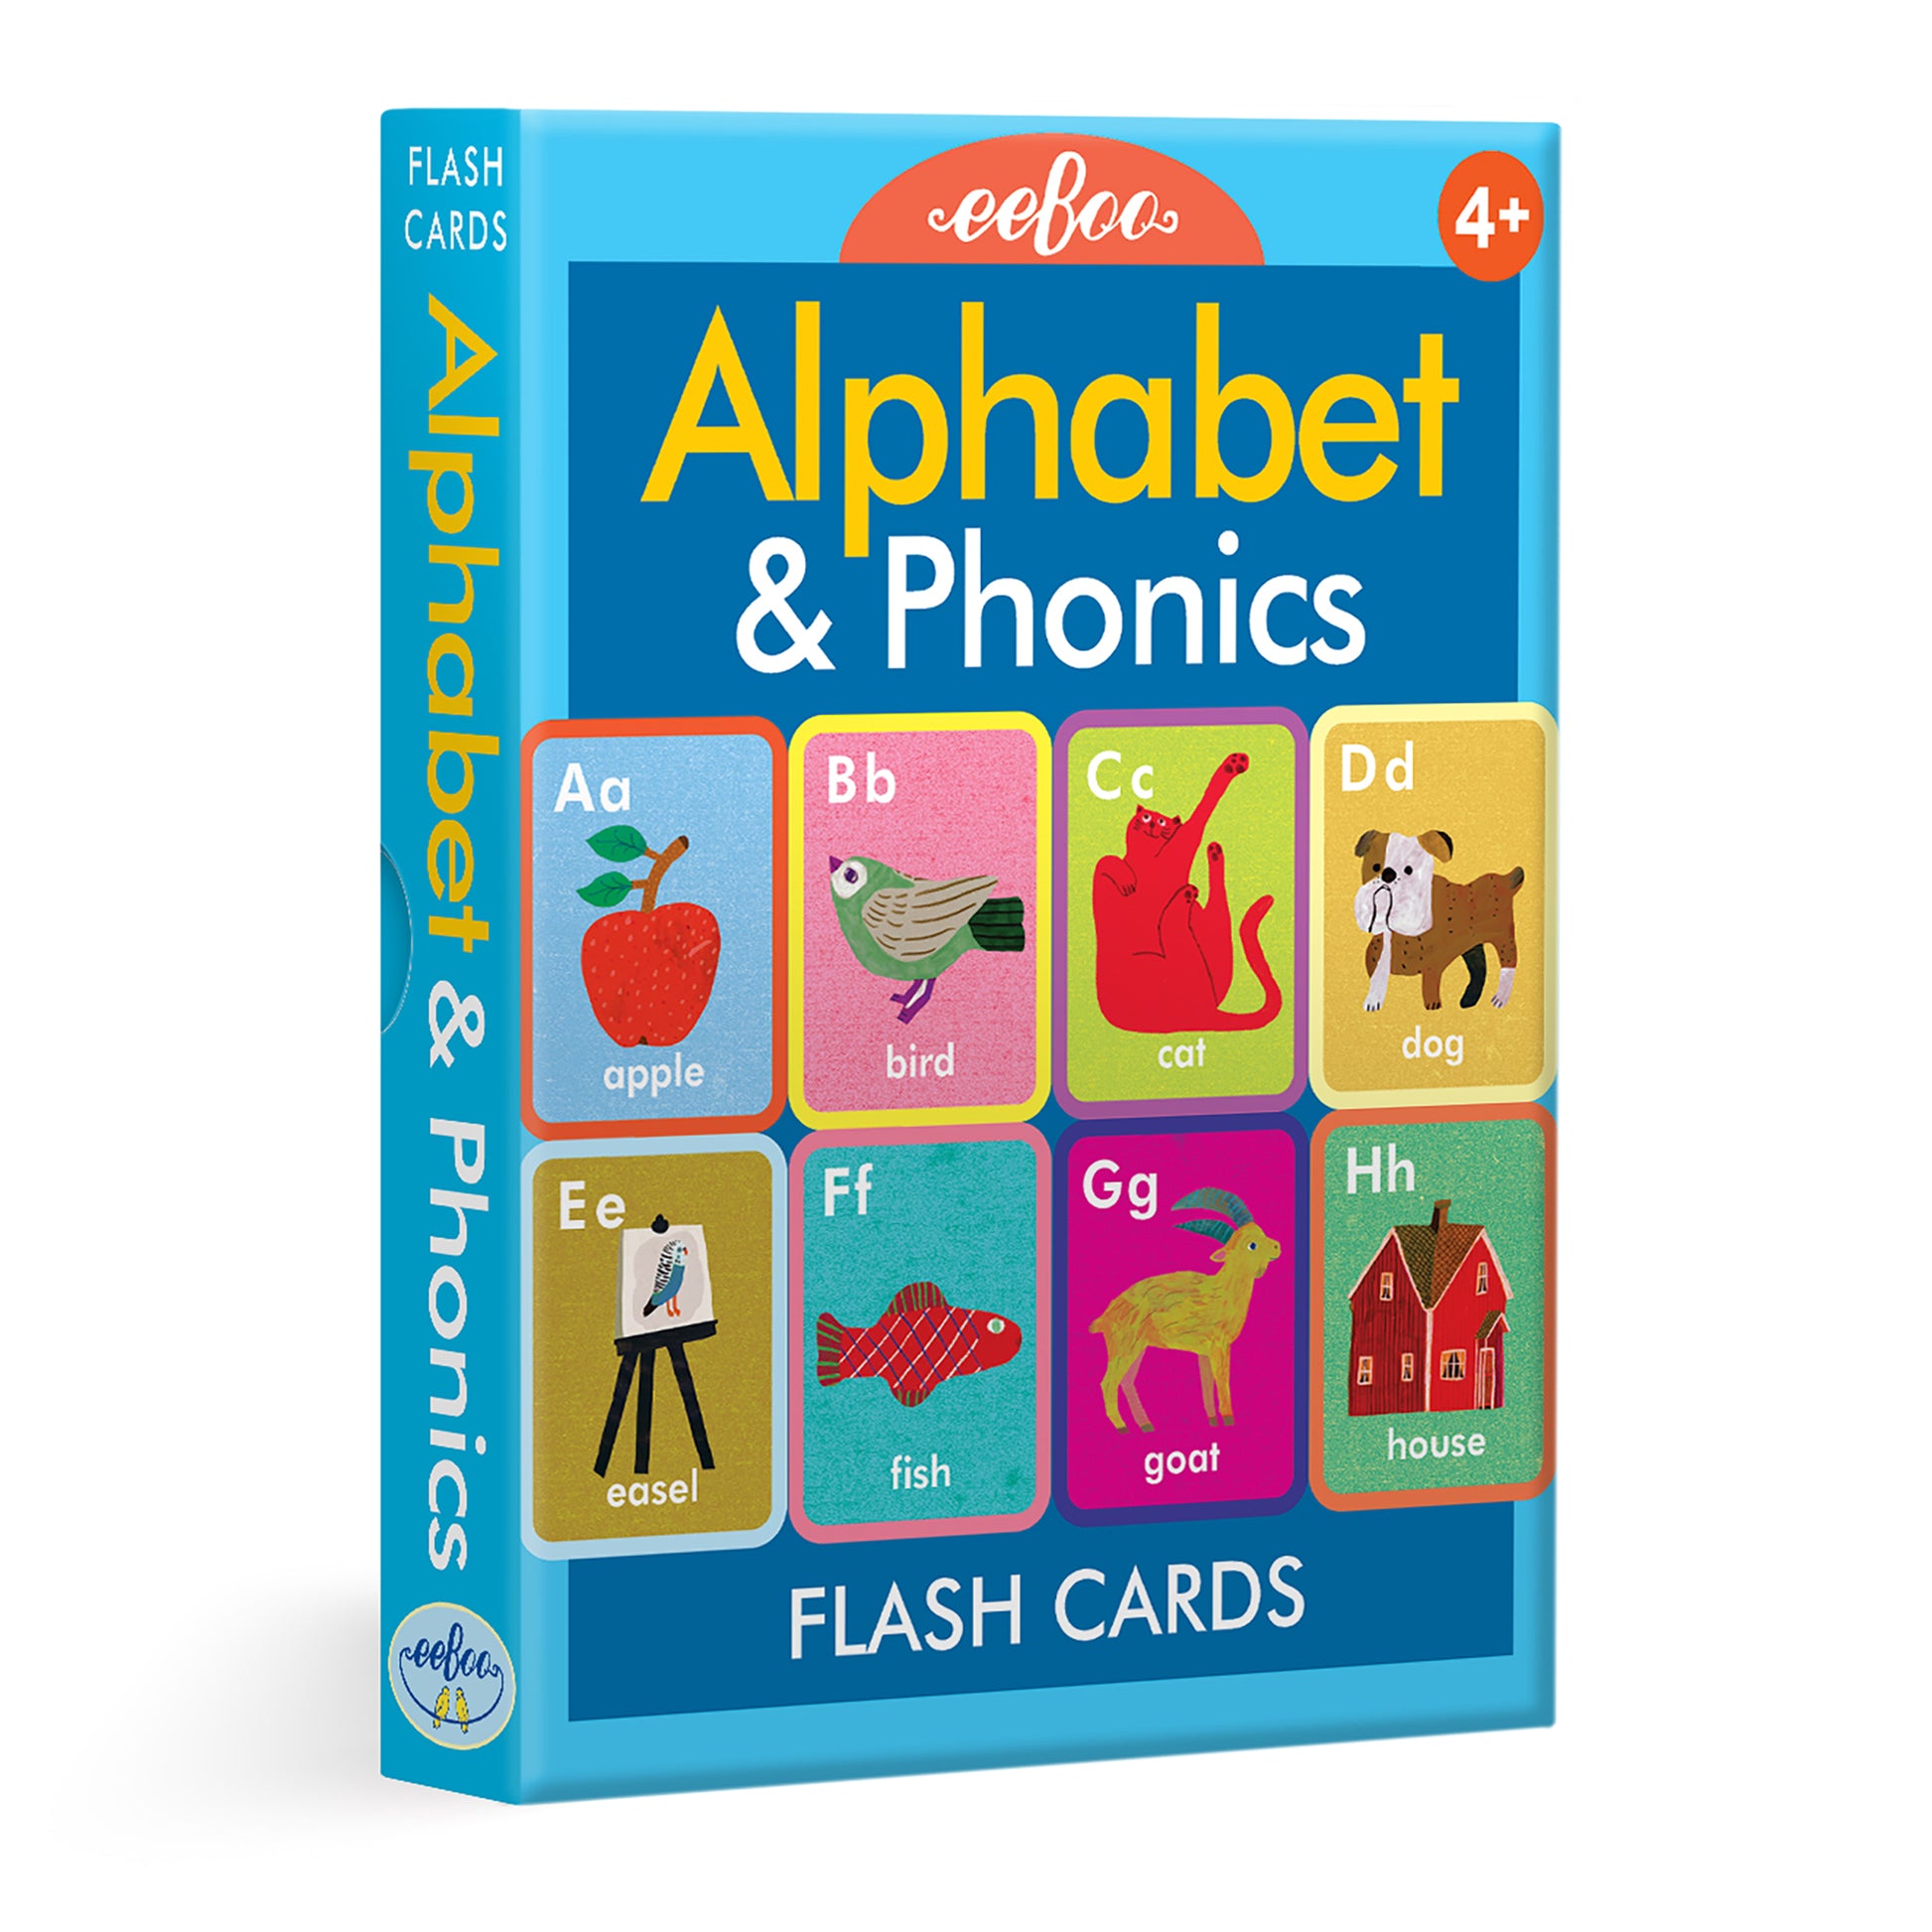 Alphabet and Phonics Educational Flash Cards eeBoo for Kids Ages 4+